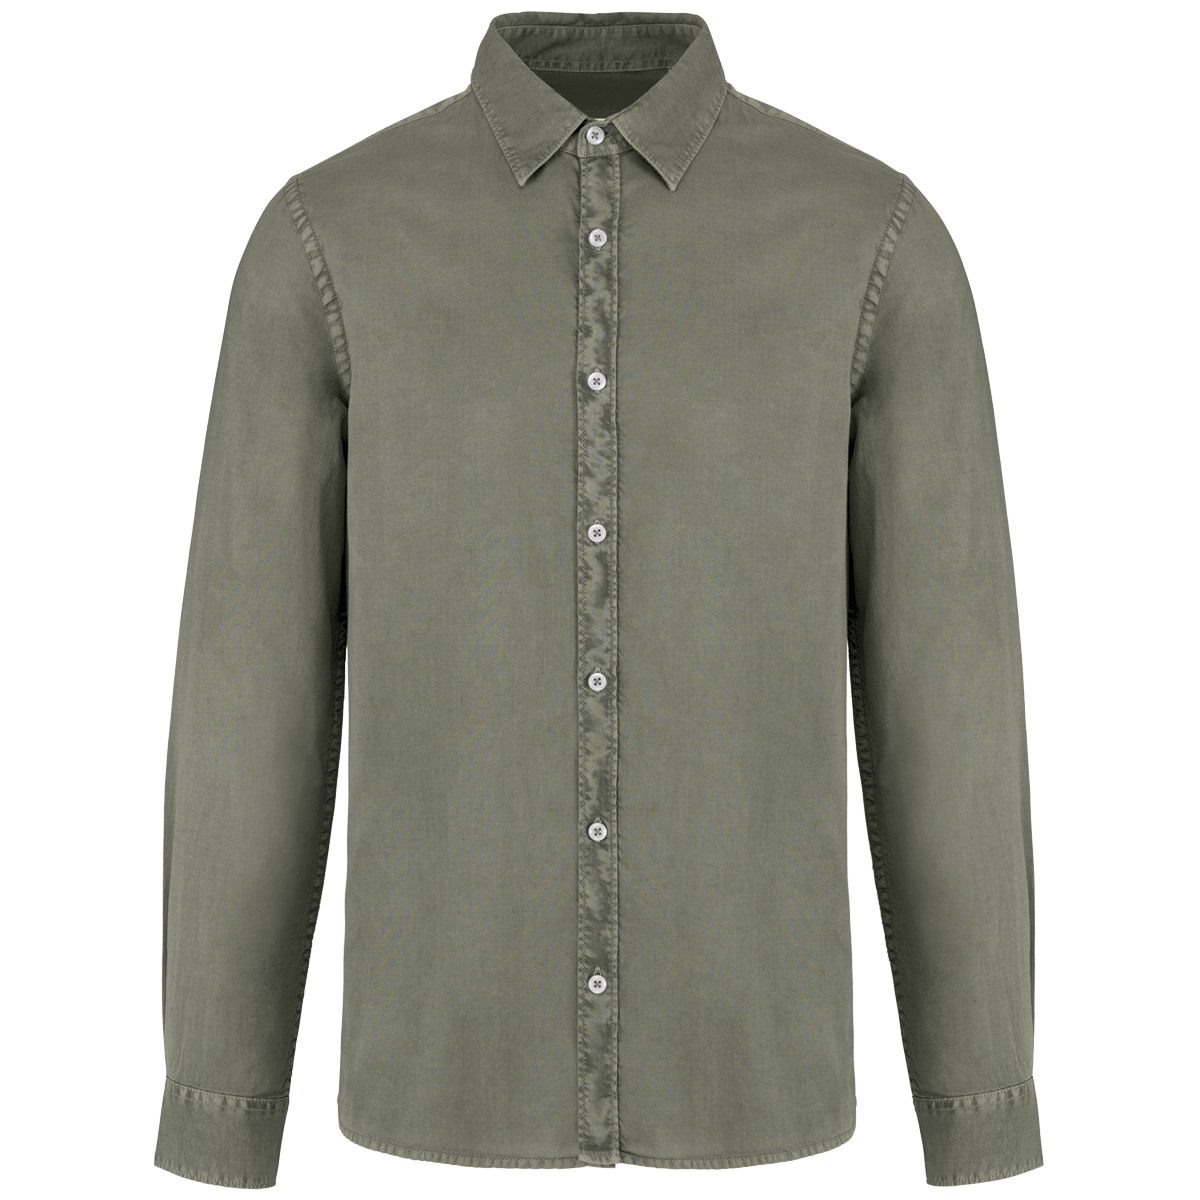 Chemise Washed Homme Bio | 100% Coton Twill Bio | Broderie Et Flocage Washed Pale Khaki